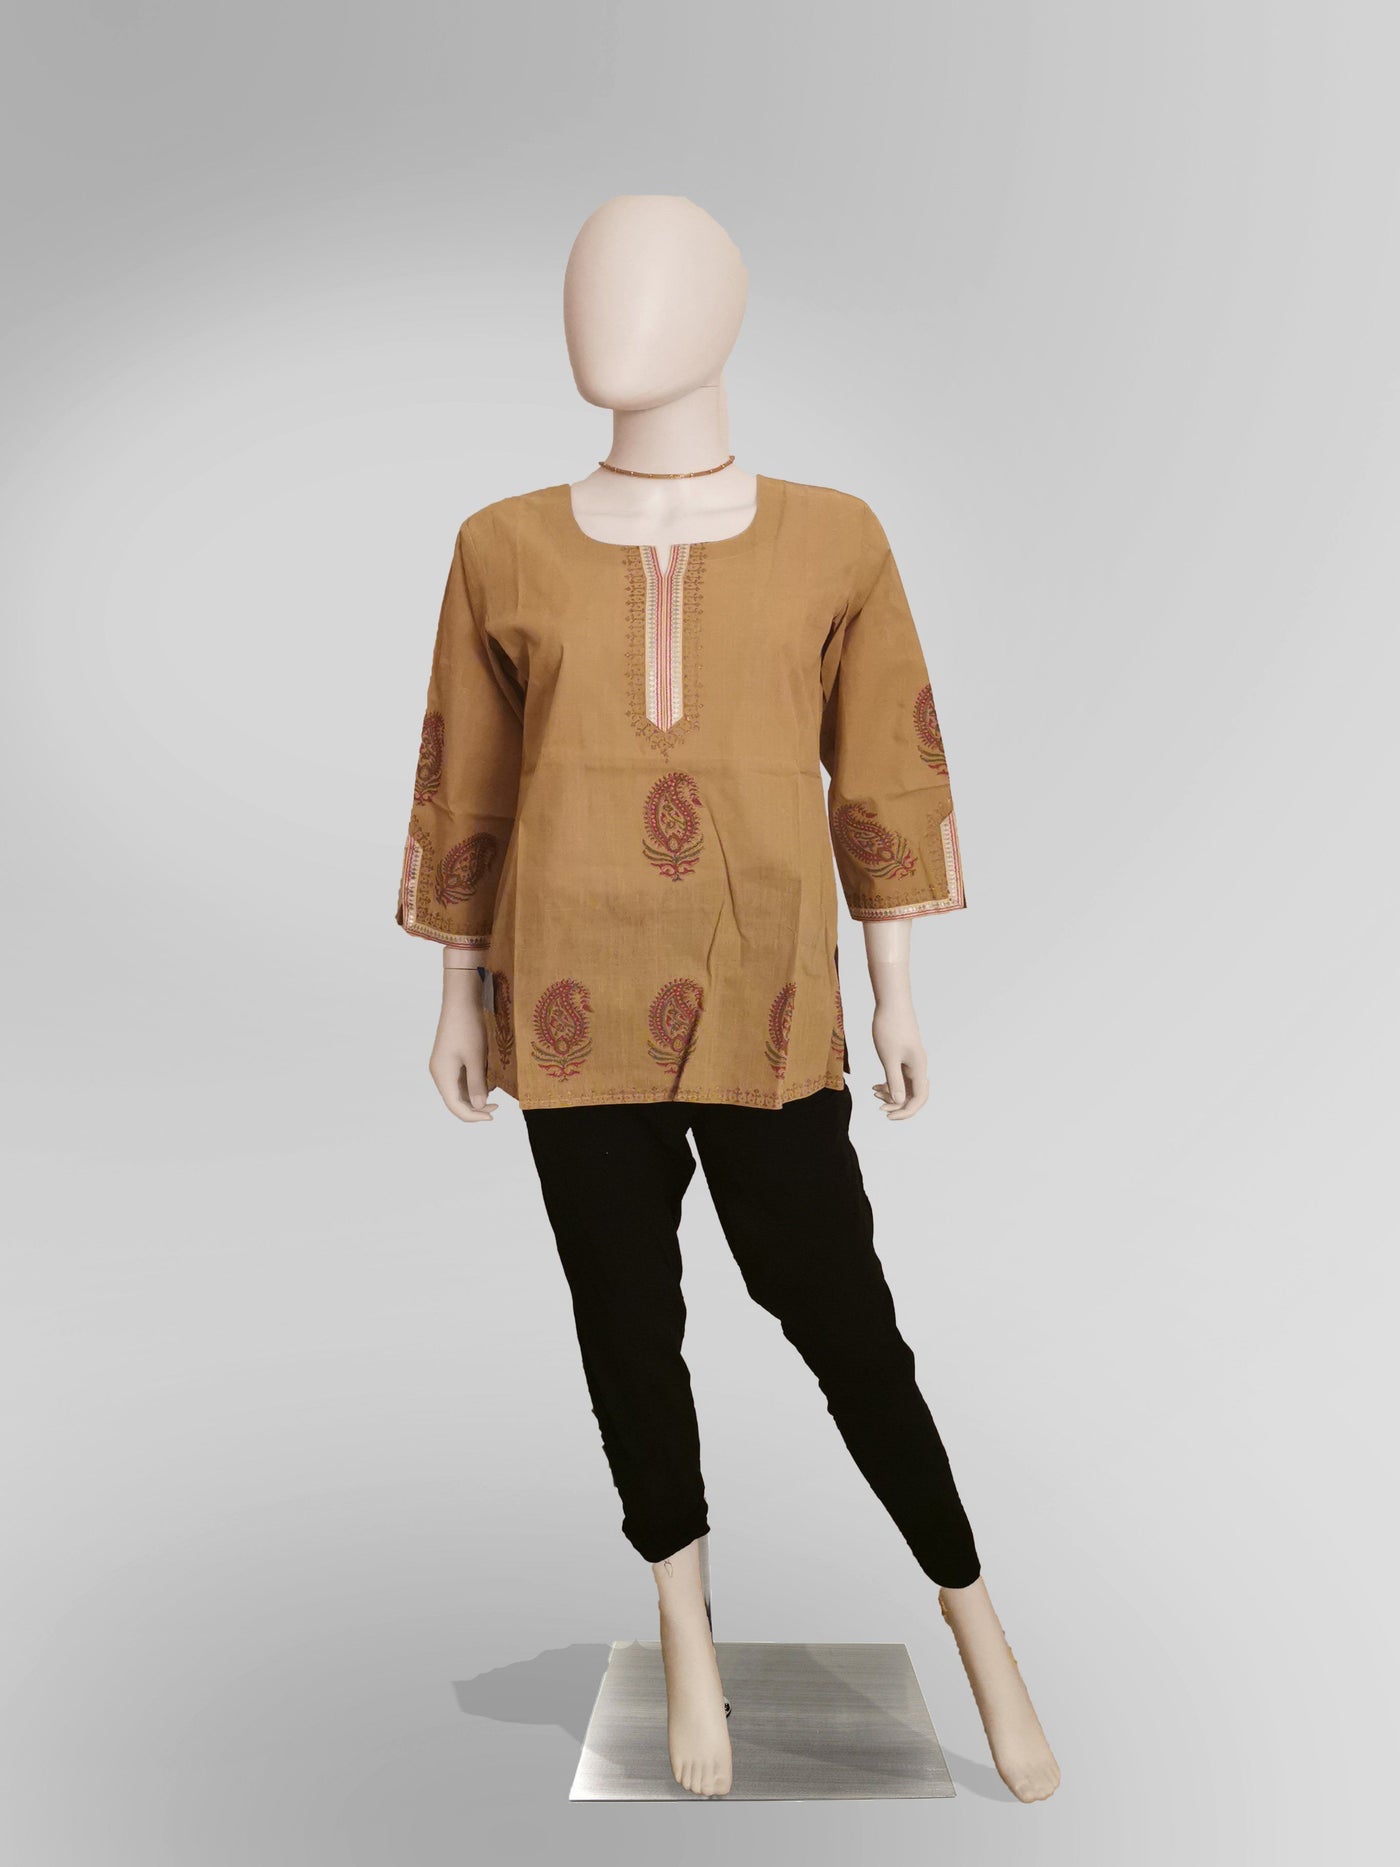 3/4 Sleeve Kurti Top in Beige Tan Indian Clothing in Denver, CO, Aurora, CO, Boulder, CO, Fort Collins, CO, Colorado Springs, CO, Parker, CO, Highlands Ranch, CO, Cherry Creek, CO, Centennial, CO, and Longmont, CO. NATIONWIDE SHIPPING USA- India Fashion X